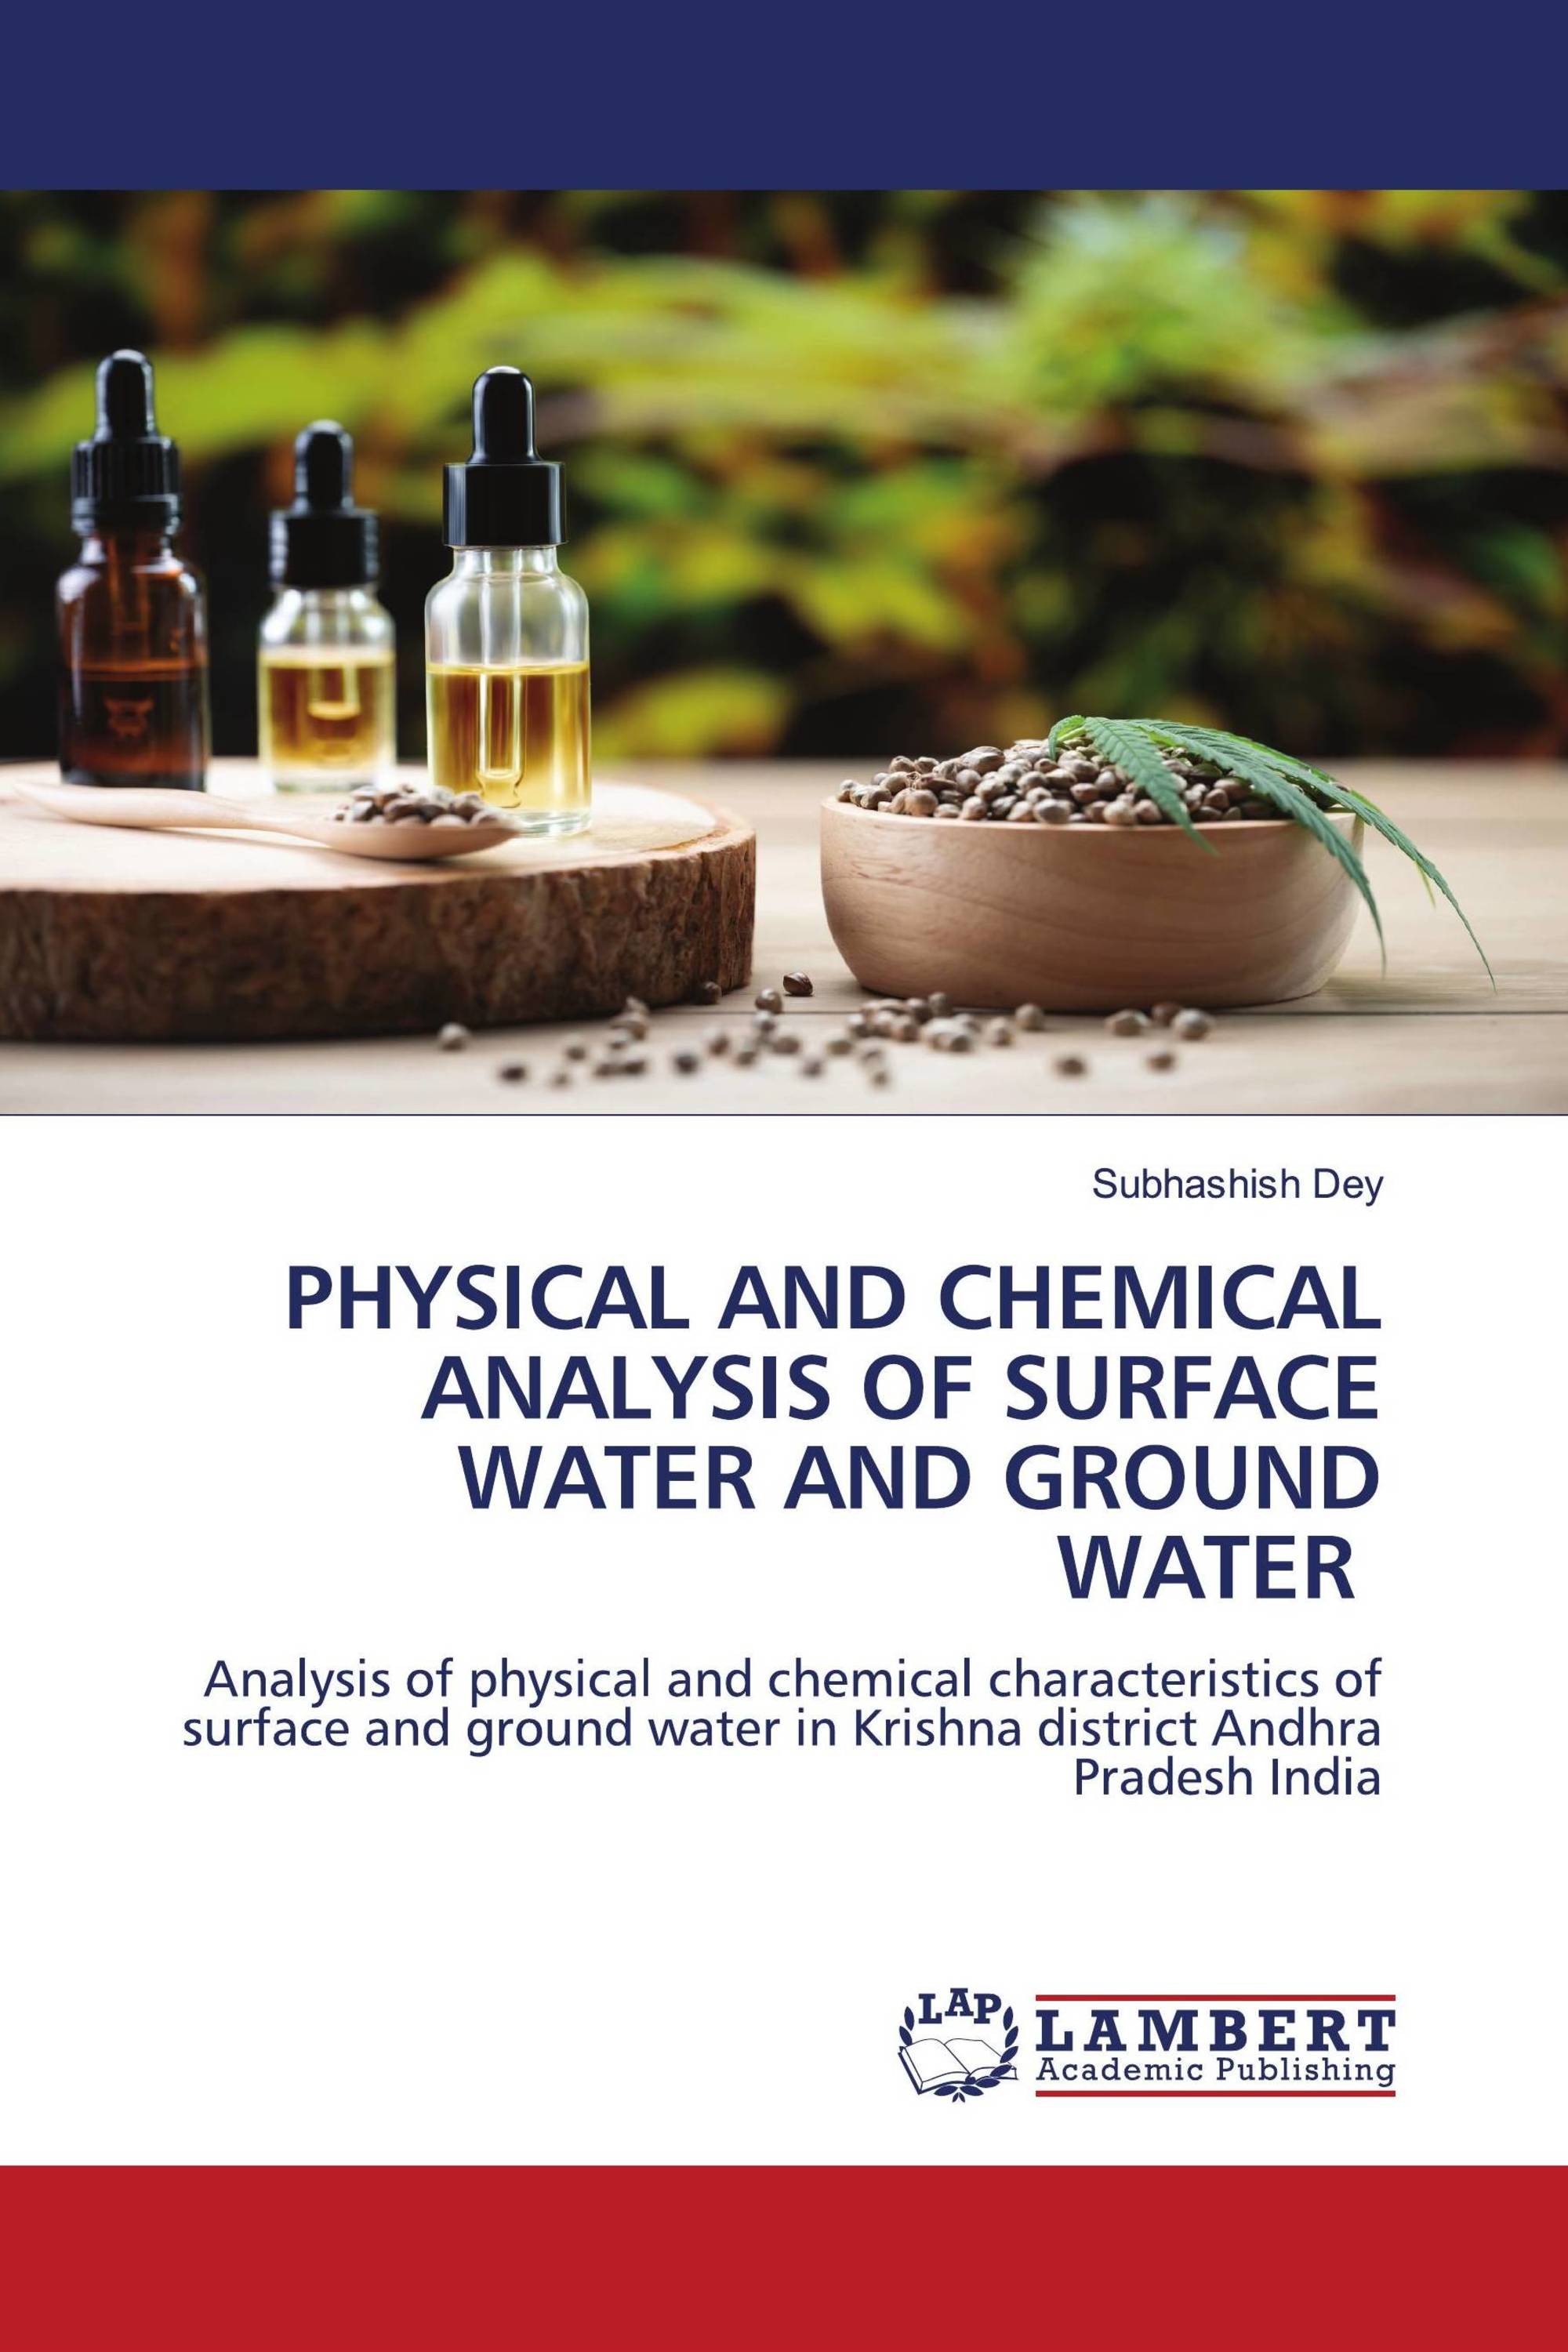 PHYSICAL AND CHEMICAL ANALYSIS OF SURFACE WATER AND GROUND WATER